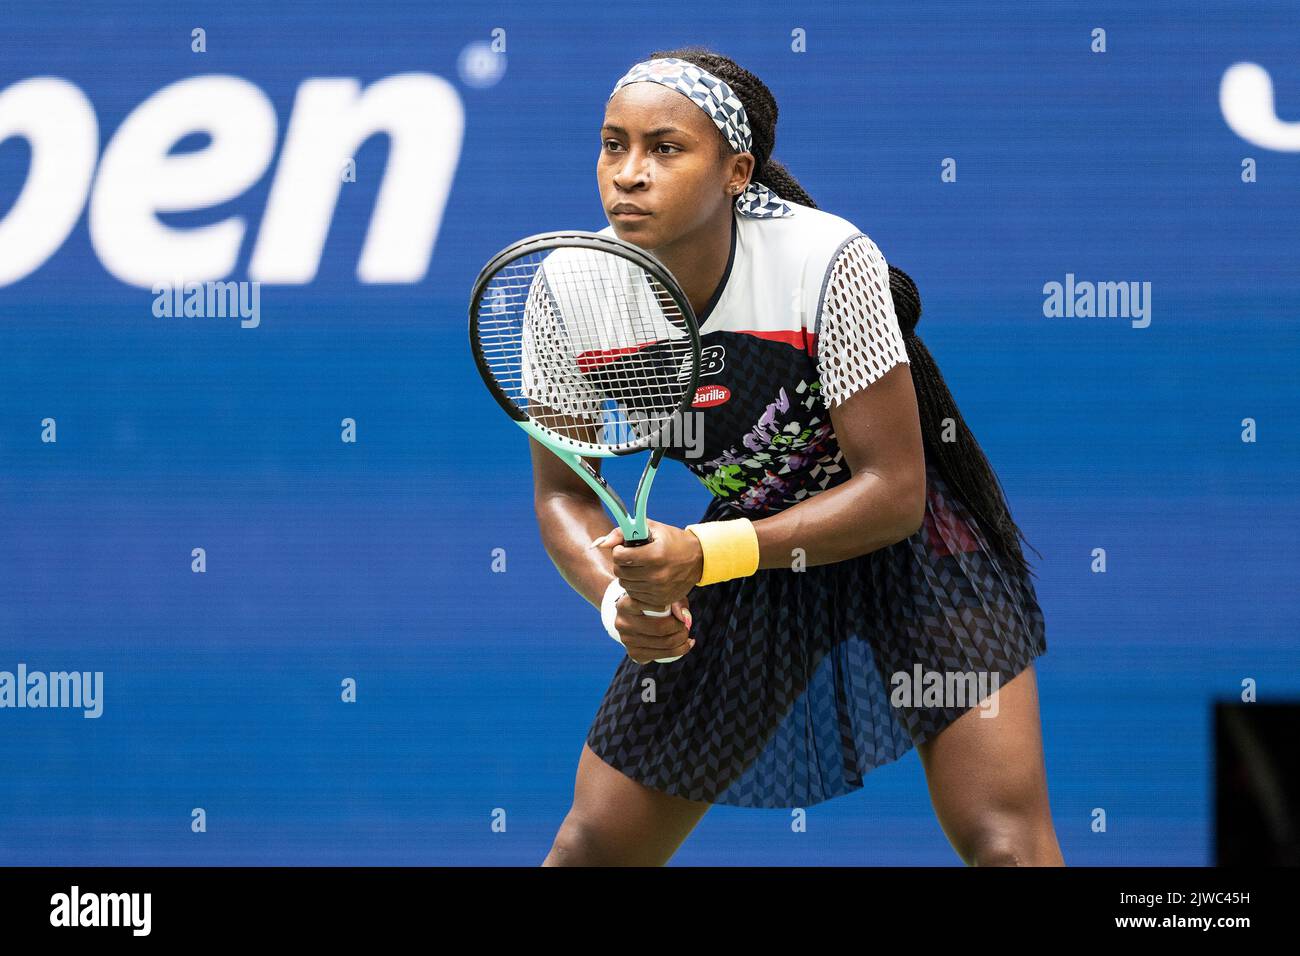 New York, USA. 04th Sep, 2022. Coco Gauff in action during 4th round of US Open Championships against Shuai Zhang of China at USTA Billie Jean King National Tennis Center in New York on September 4, 2022. Gauff won in straight sets and moved into quarterfinals of the Open for the first time in her career. (Photo by Lev Radin/Spa USA) Credit: Sipa USA/Alamy Live News Stock Photo